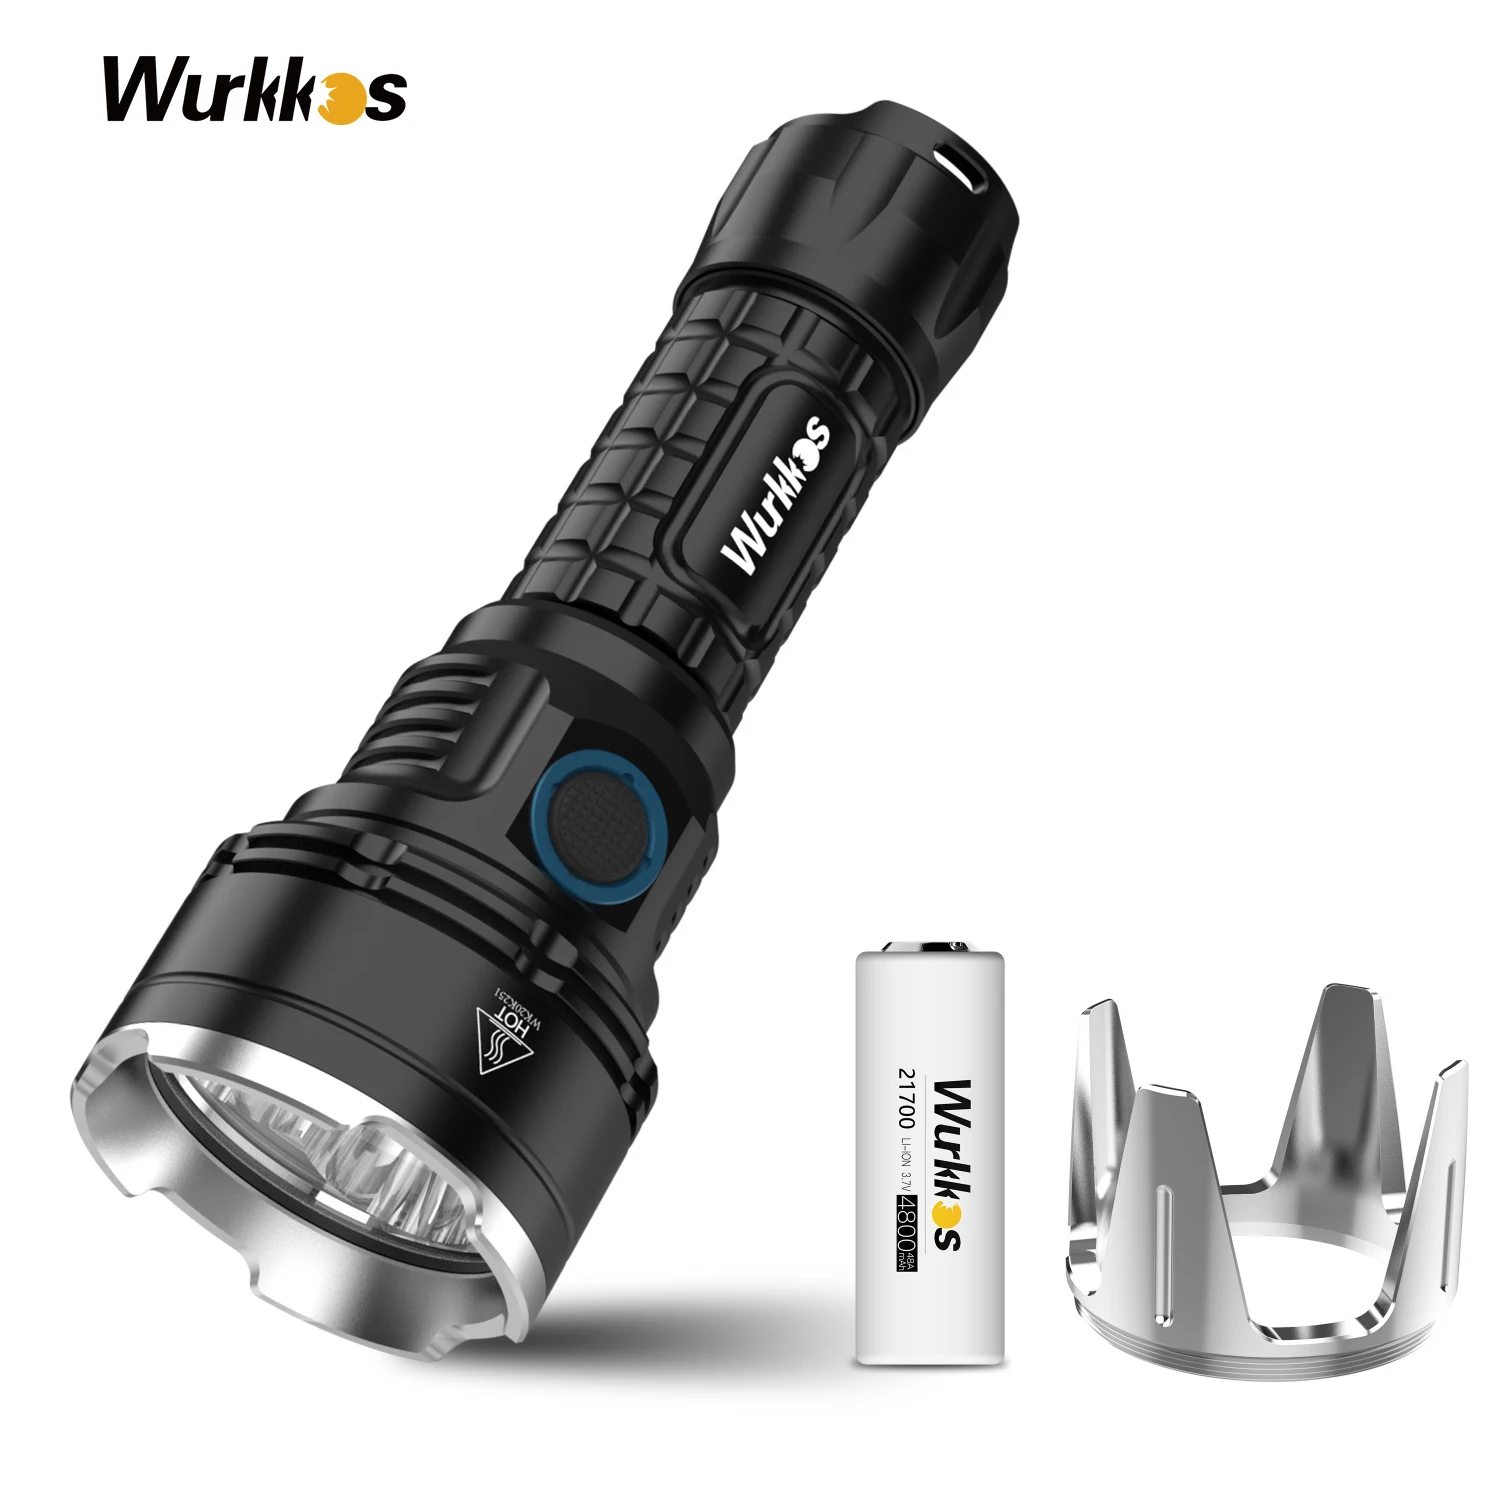 

Wurkkos TS30 Rechargeable Flashlight 6000 Lumens Type -C Charge LED 4 SST40 ATR Torch Extra Stainless Bezel Power Indicator